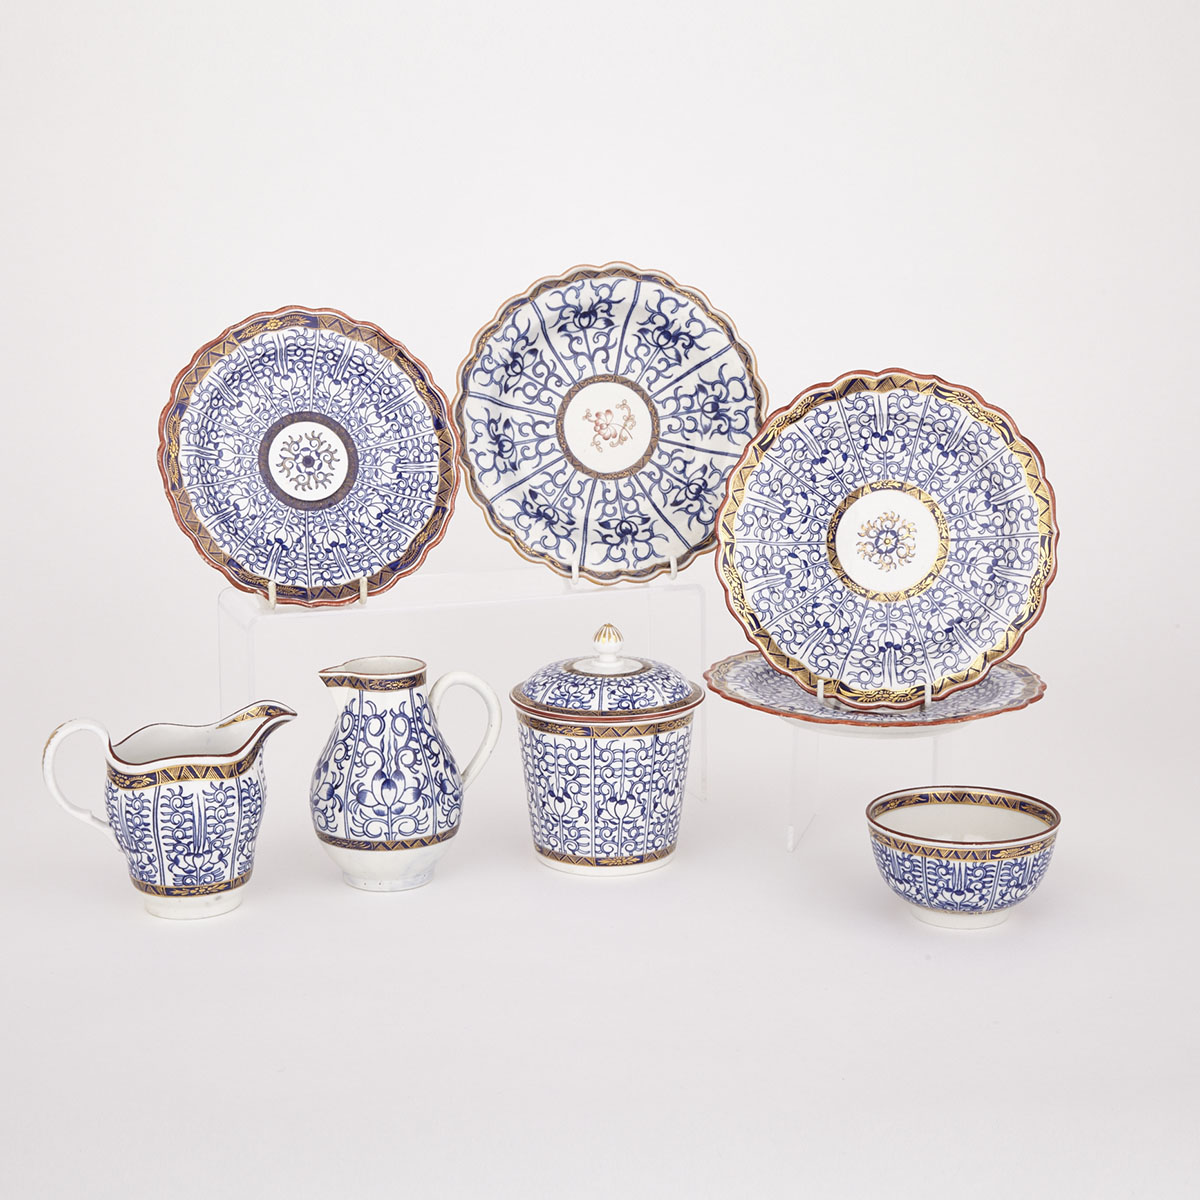 Worcester ‘Royal Lily’ Milk Jug, Cream Jug, Covered Canister, Sugar Bowl and Four Plates, late 18th century